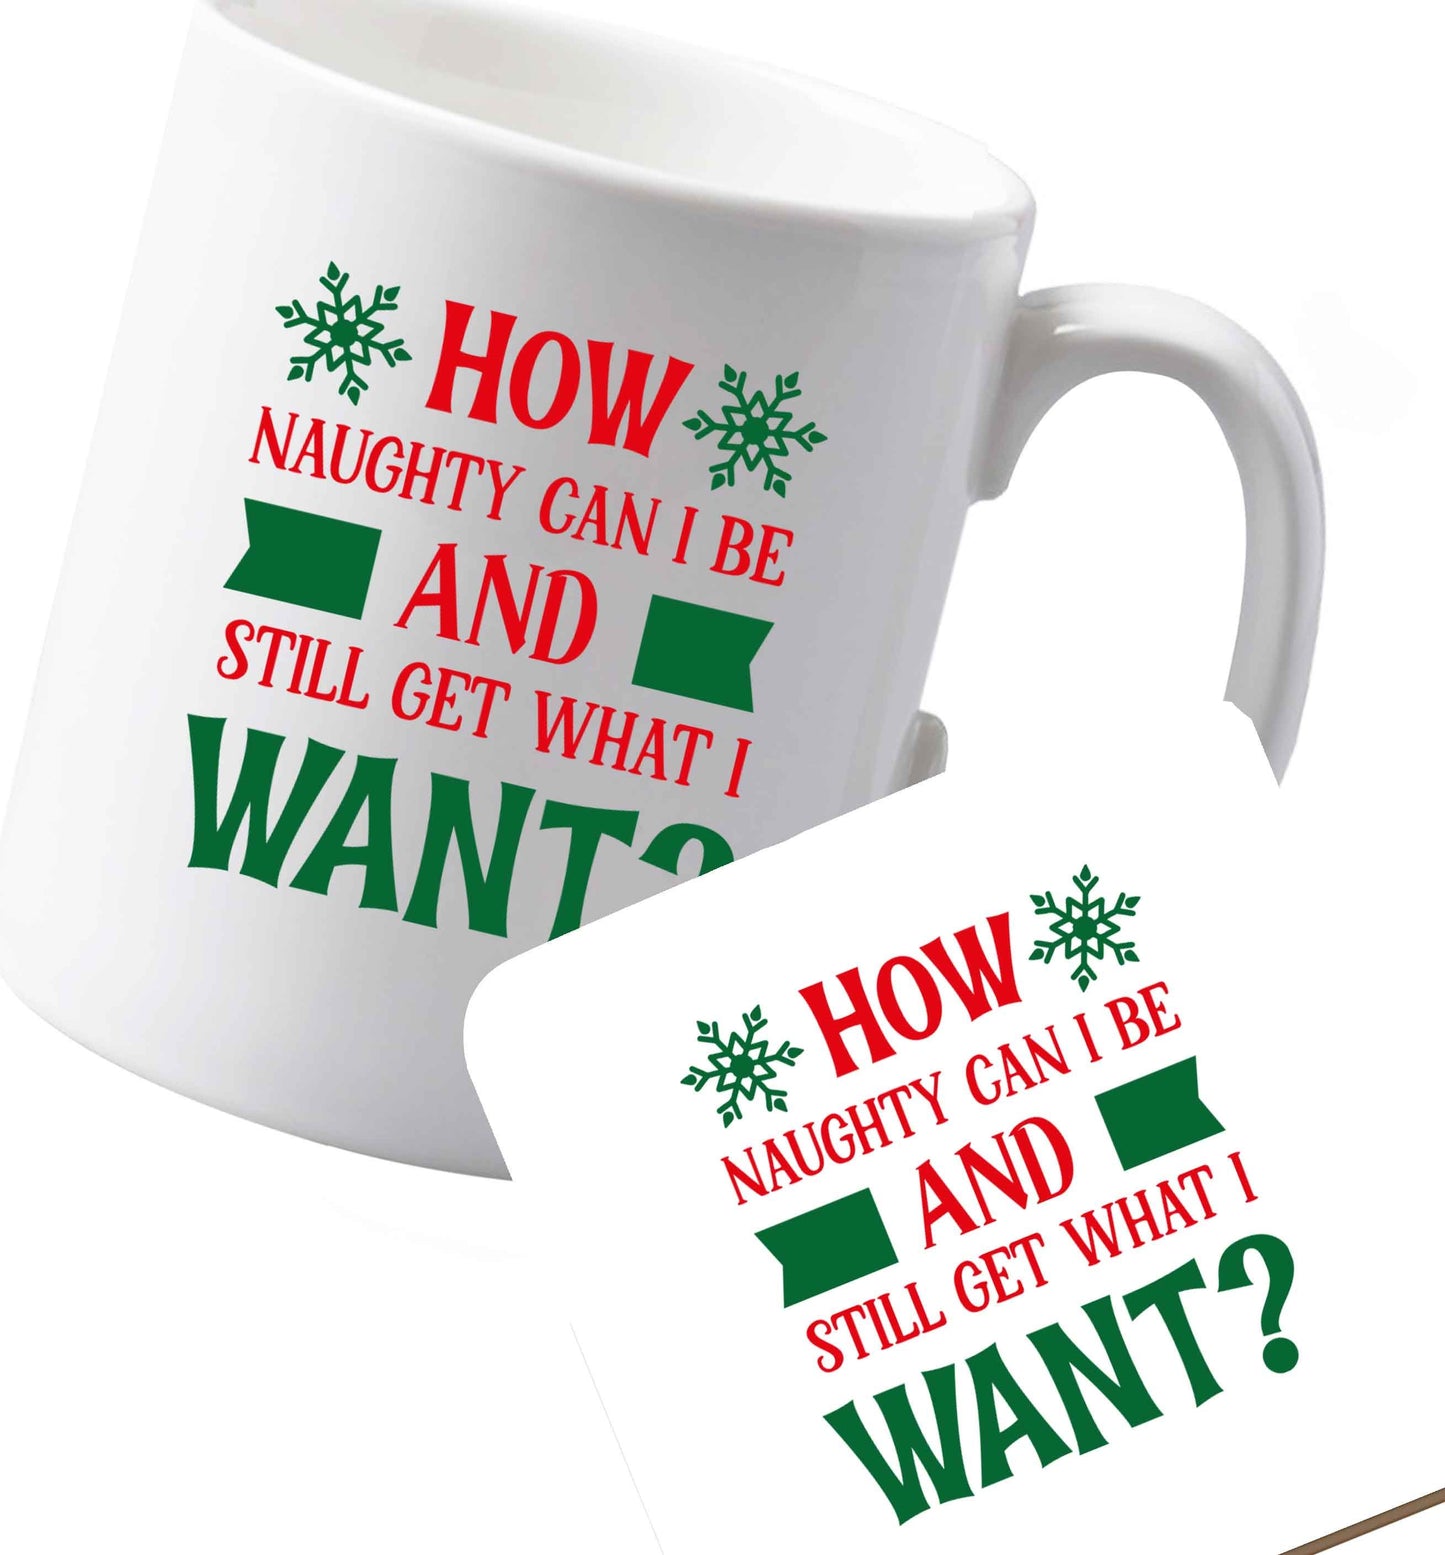 10 oz Ceramic mug and coaster How naughty can I be and still get what I want? both sides